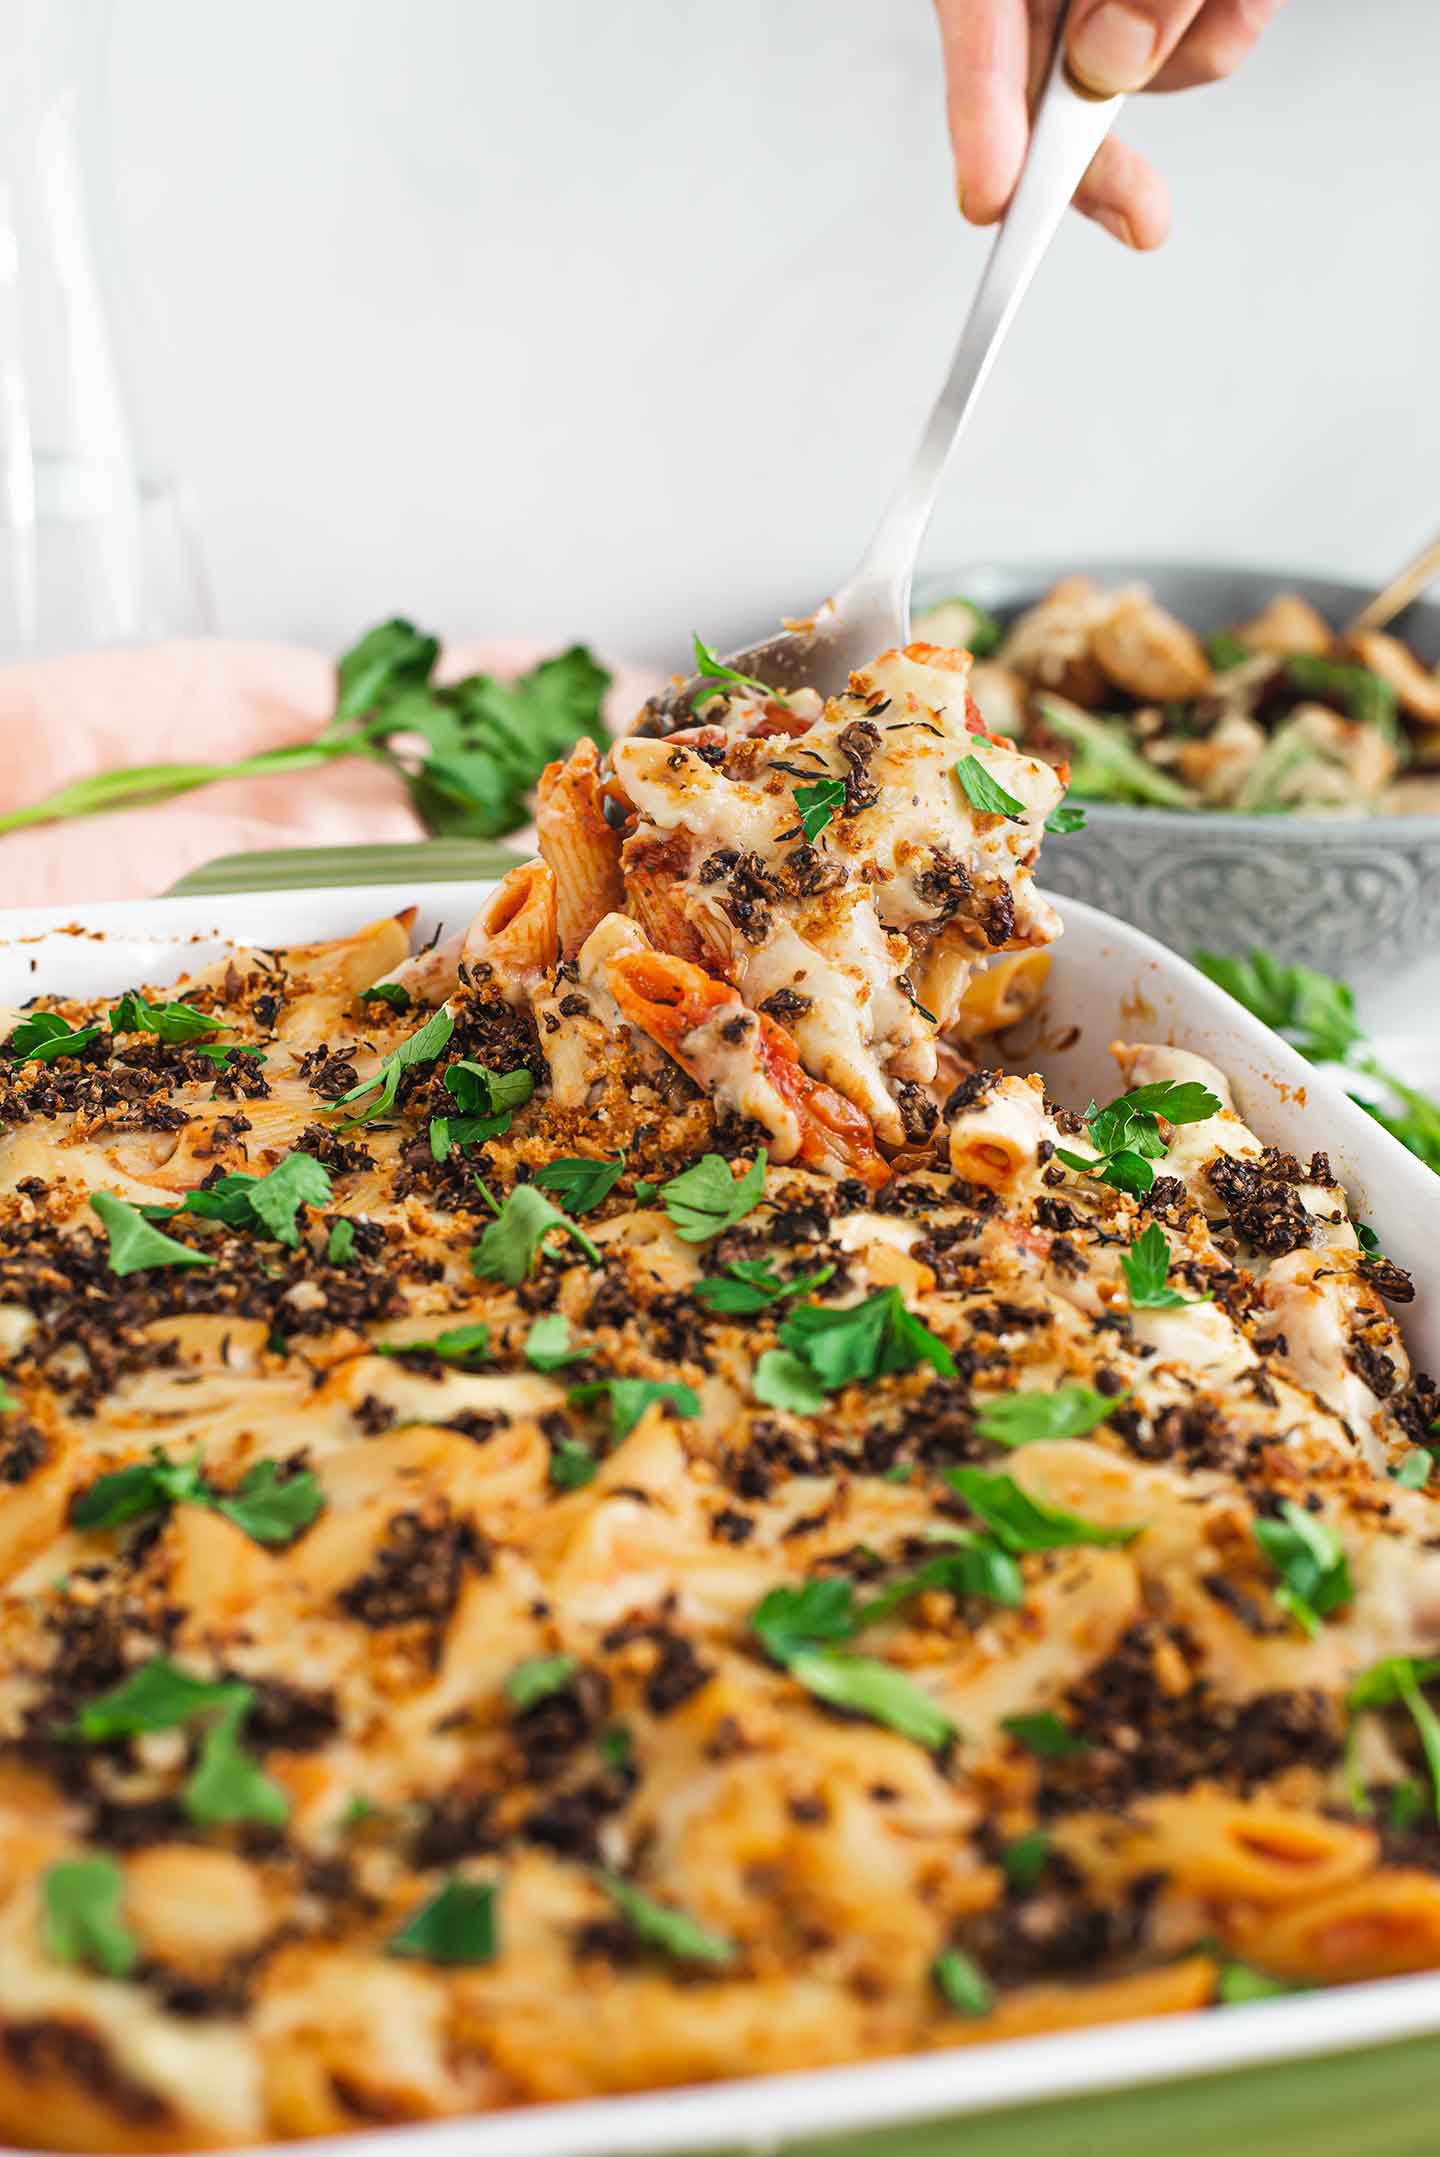 Side view of baked ziti being lifted from a casserole dish by a serving spoon. It's "cheesy", saucy, topped with mushroom ground round and fresh parsley.